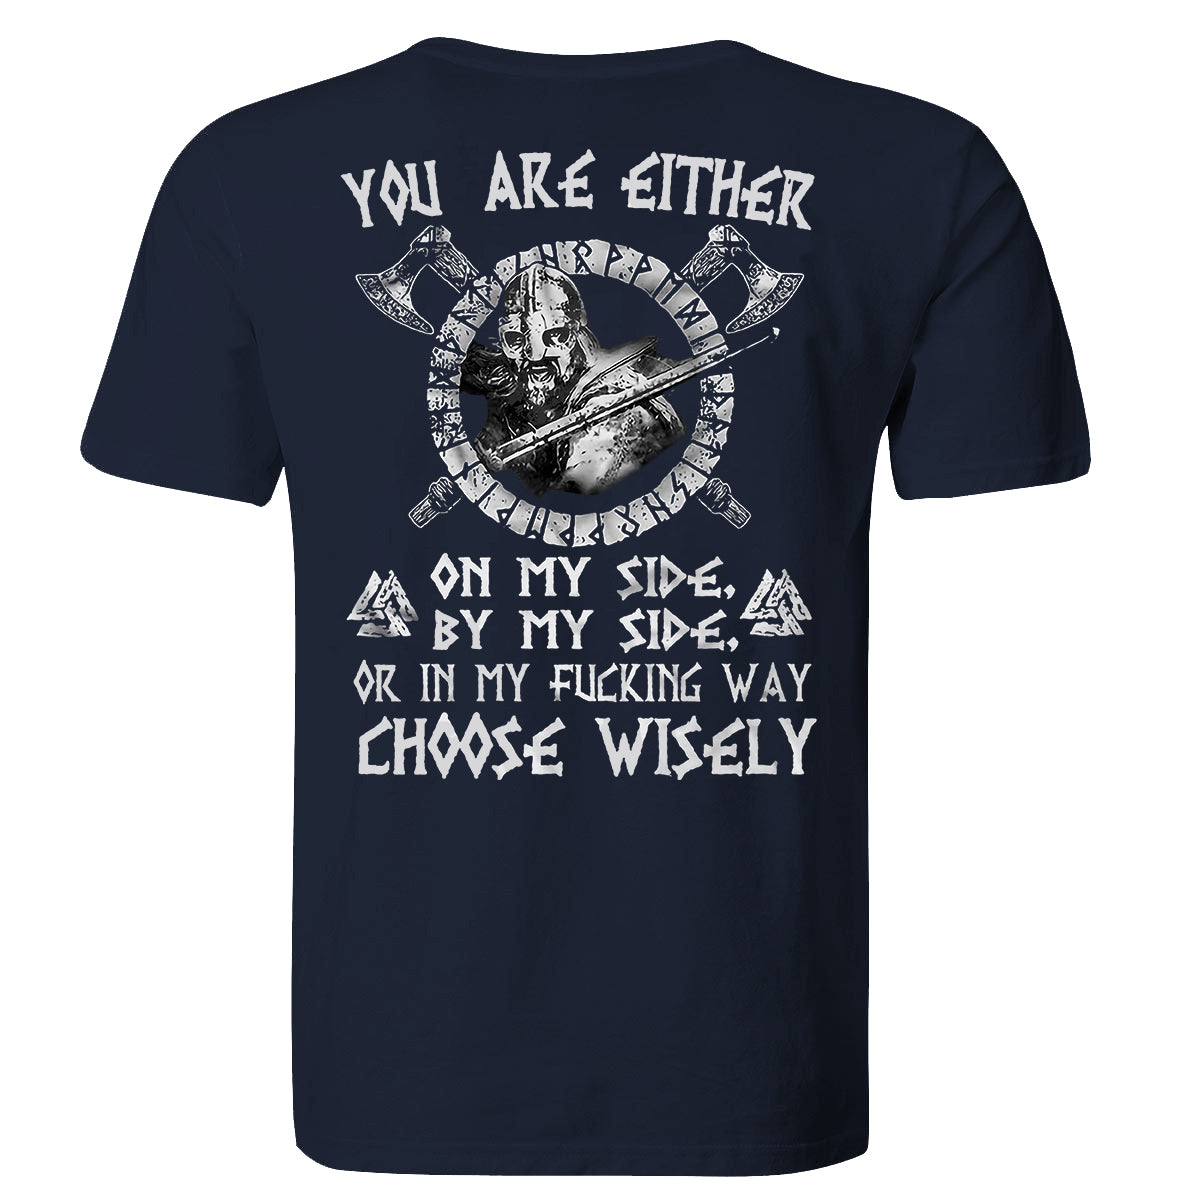 YOU ARE EITHER letter print men's casual viking style tees desginer